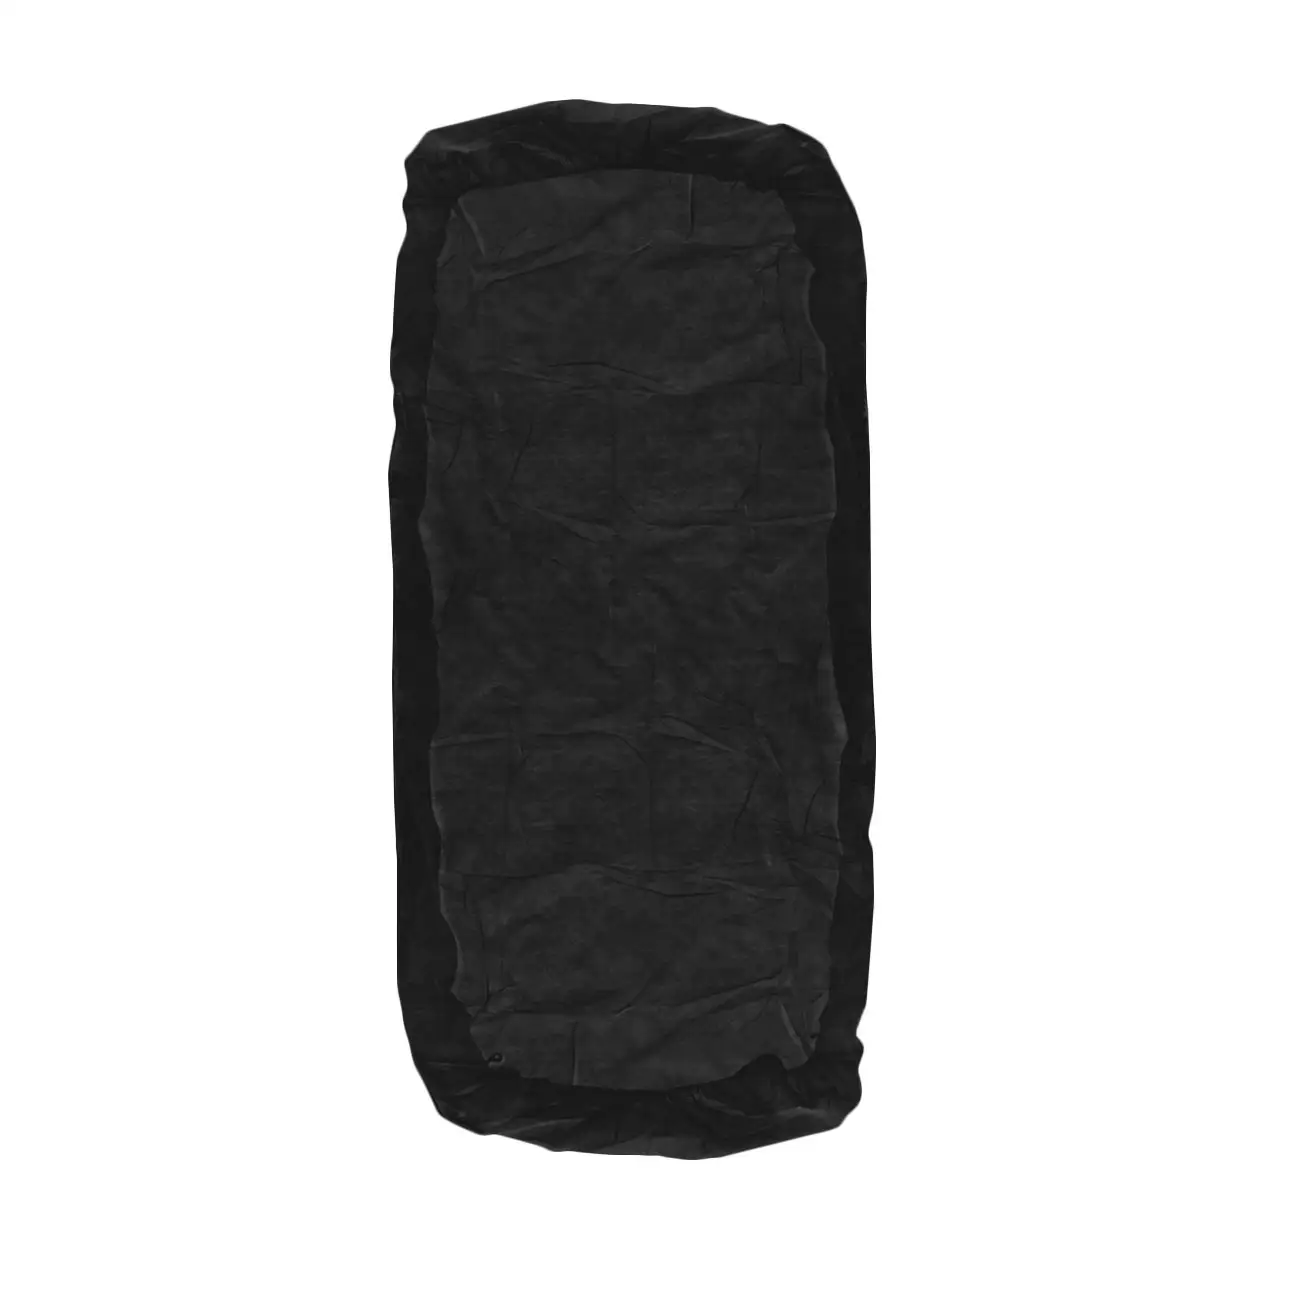 Disposable Fitted Massage Table Sheets Black Bed Cover